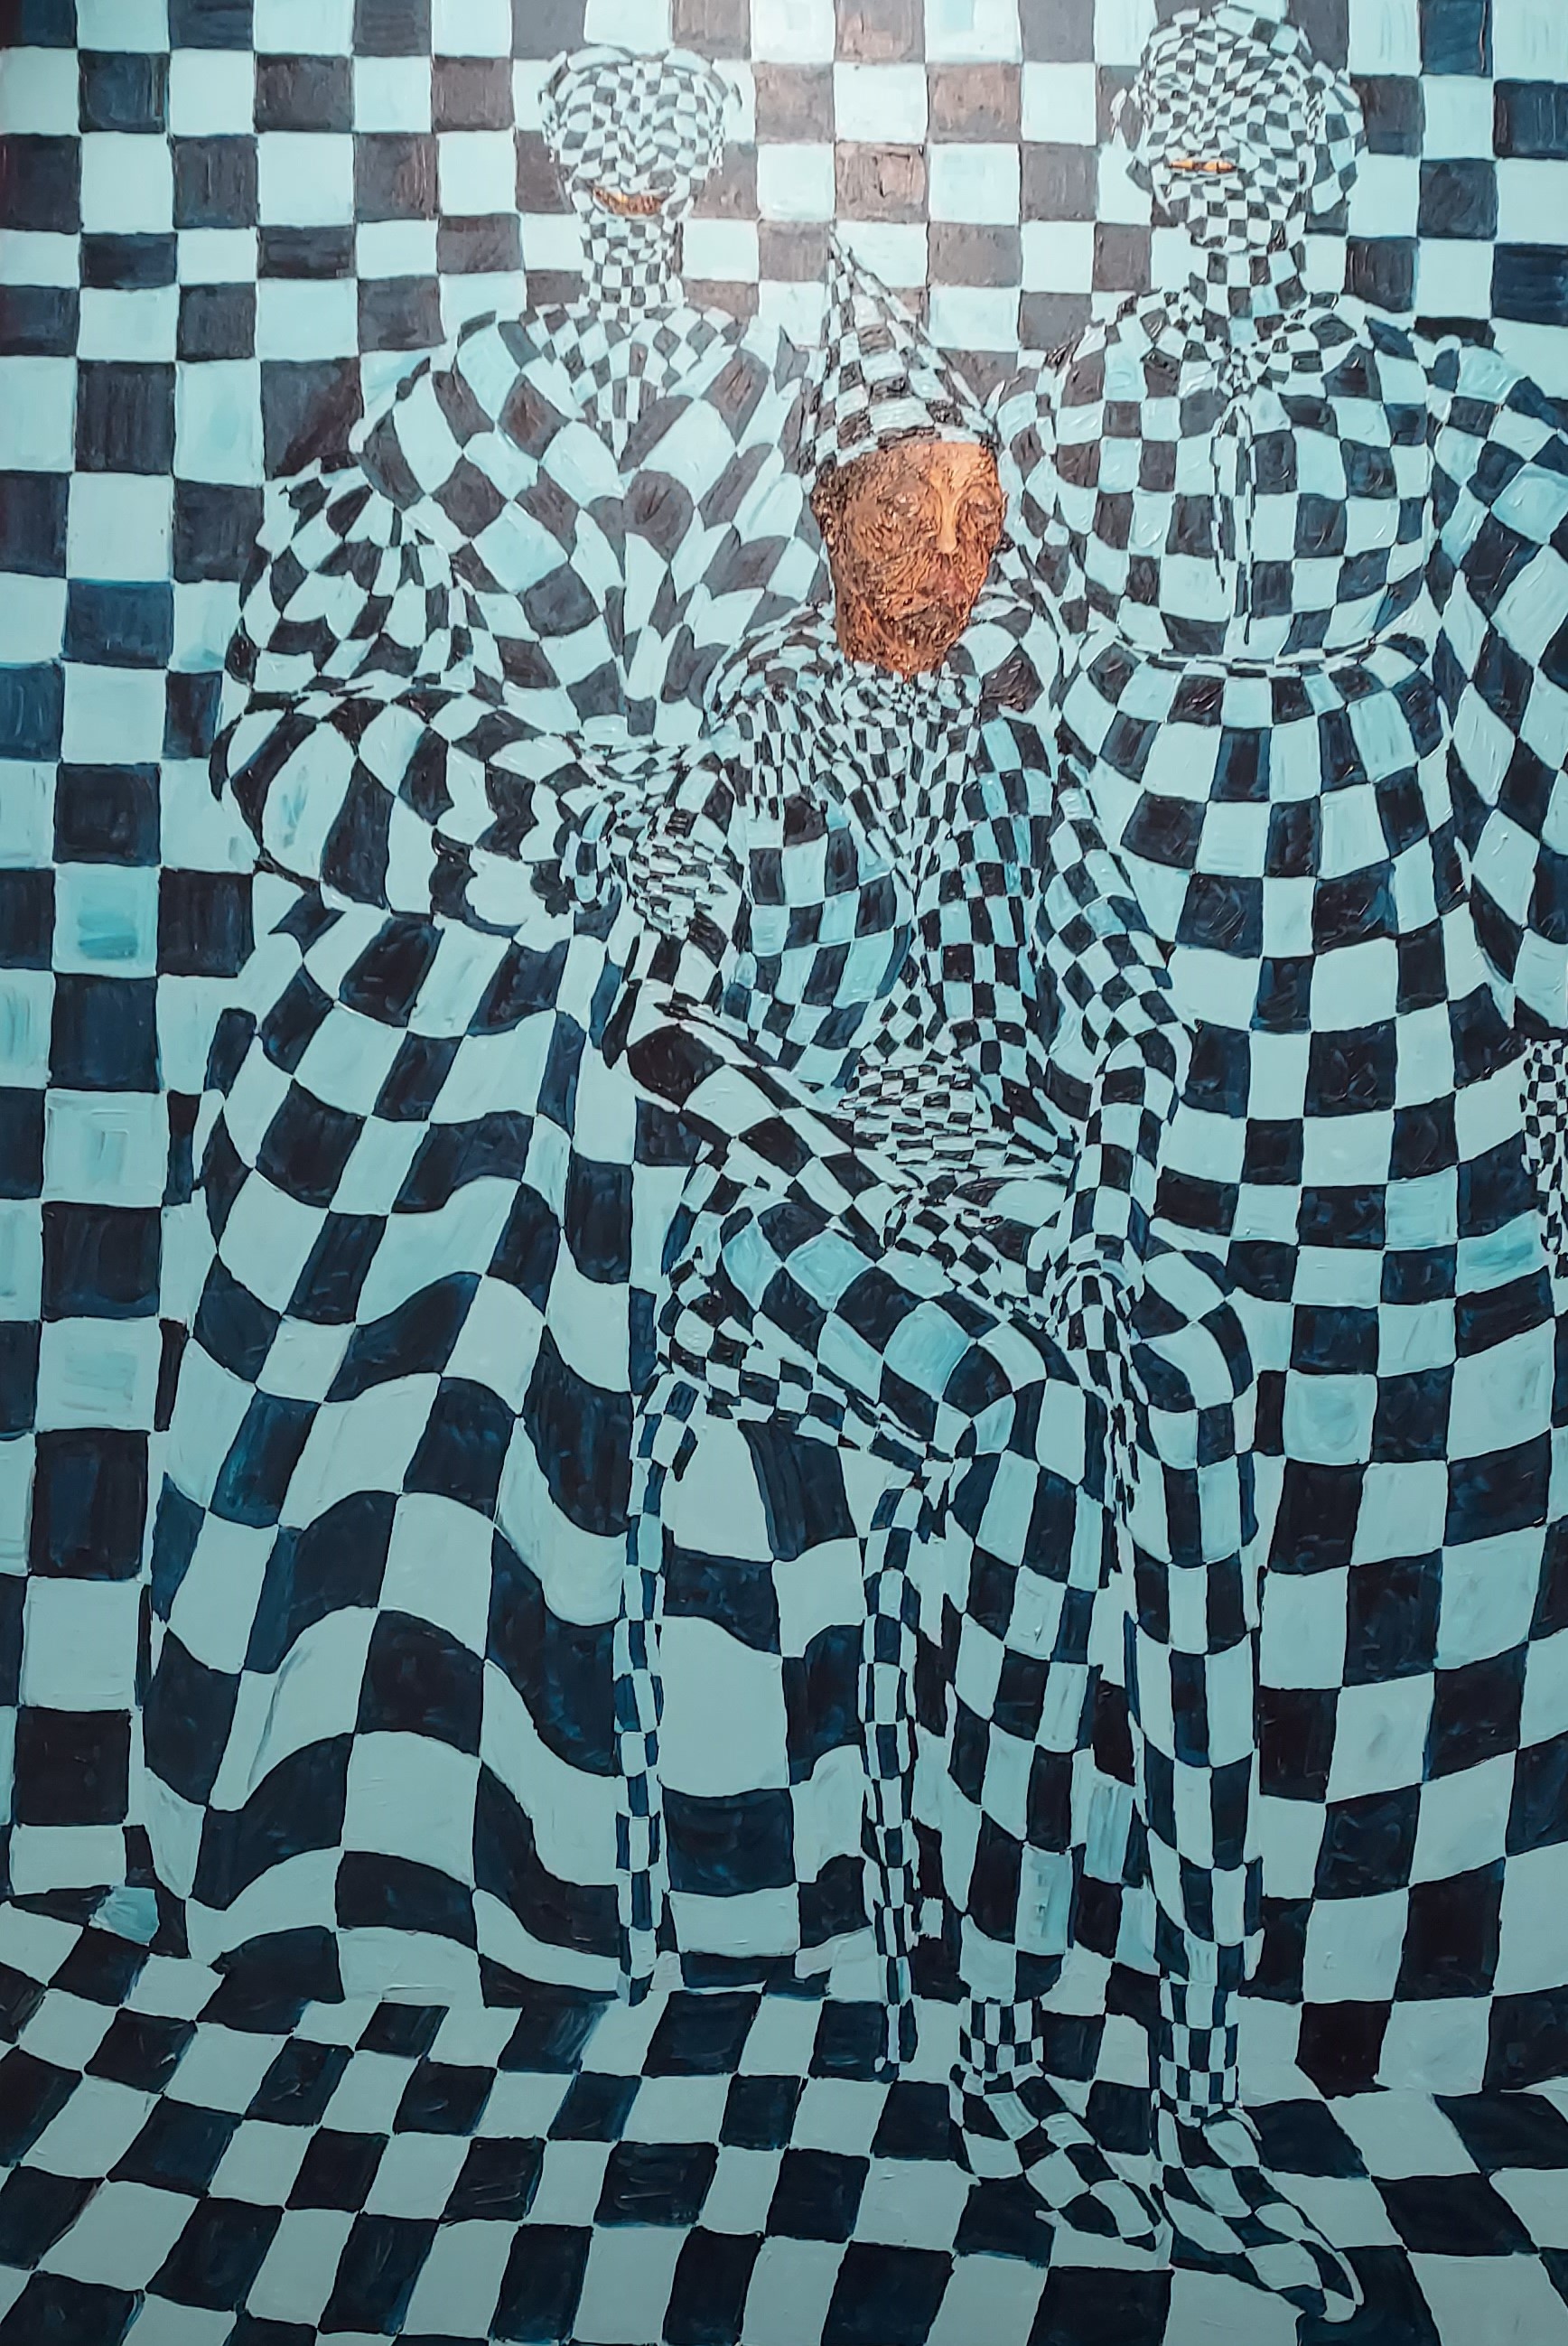 A painting comprising three figures with African heritage draped in checkerboard robes, each painted to camouflage against a black and blue checkerboard-effect background.